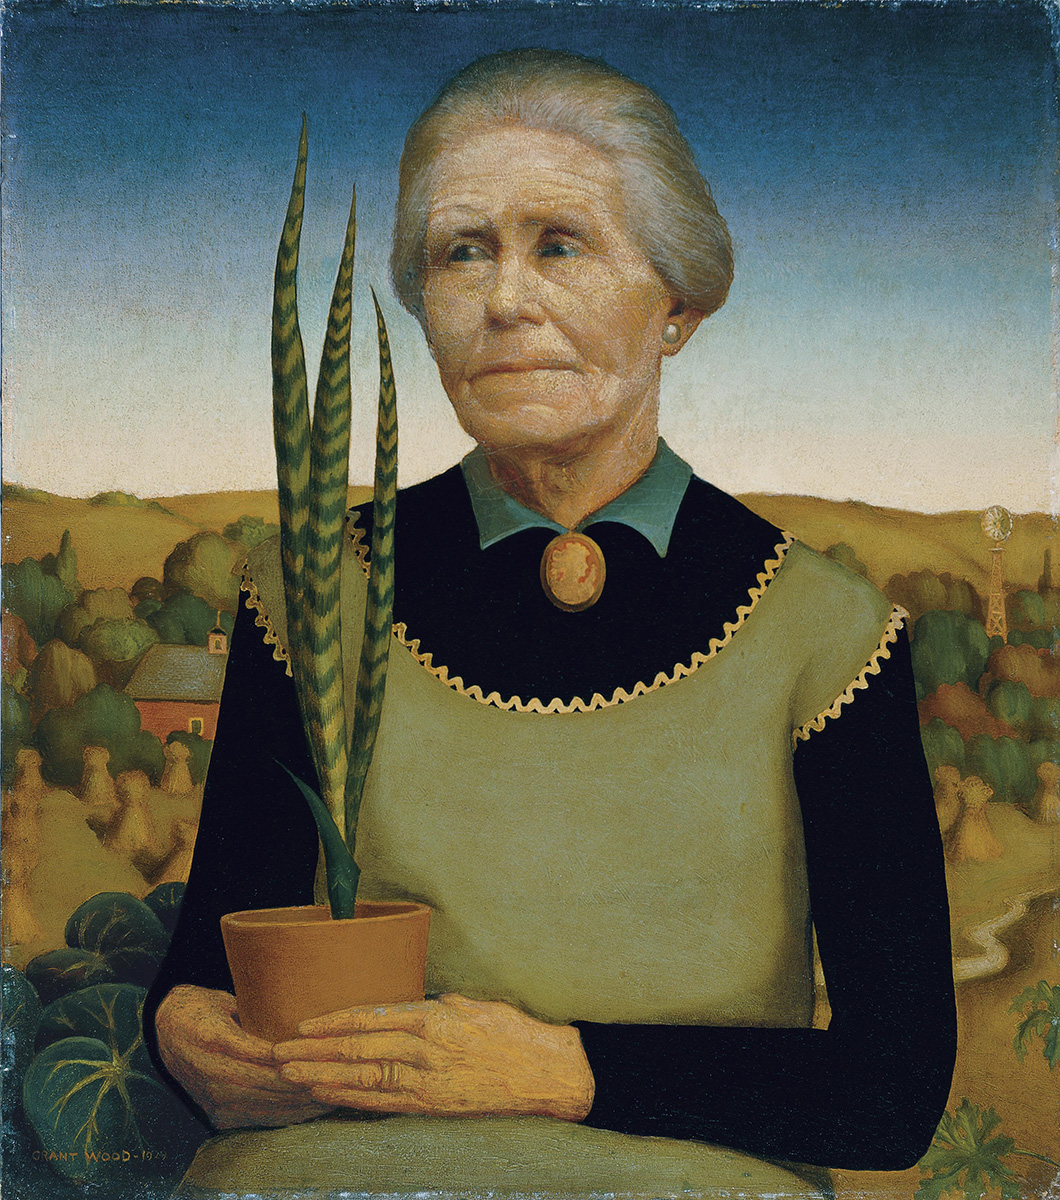 Grant Wood: From Farm Boy to American Icon Ongoing